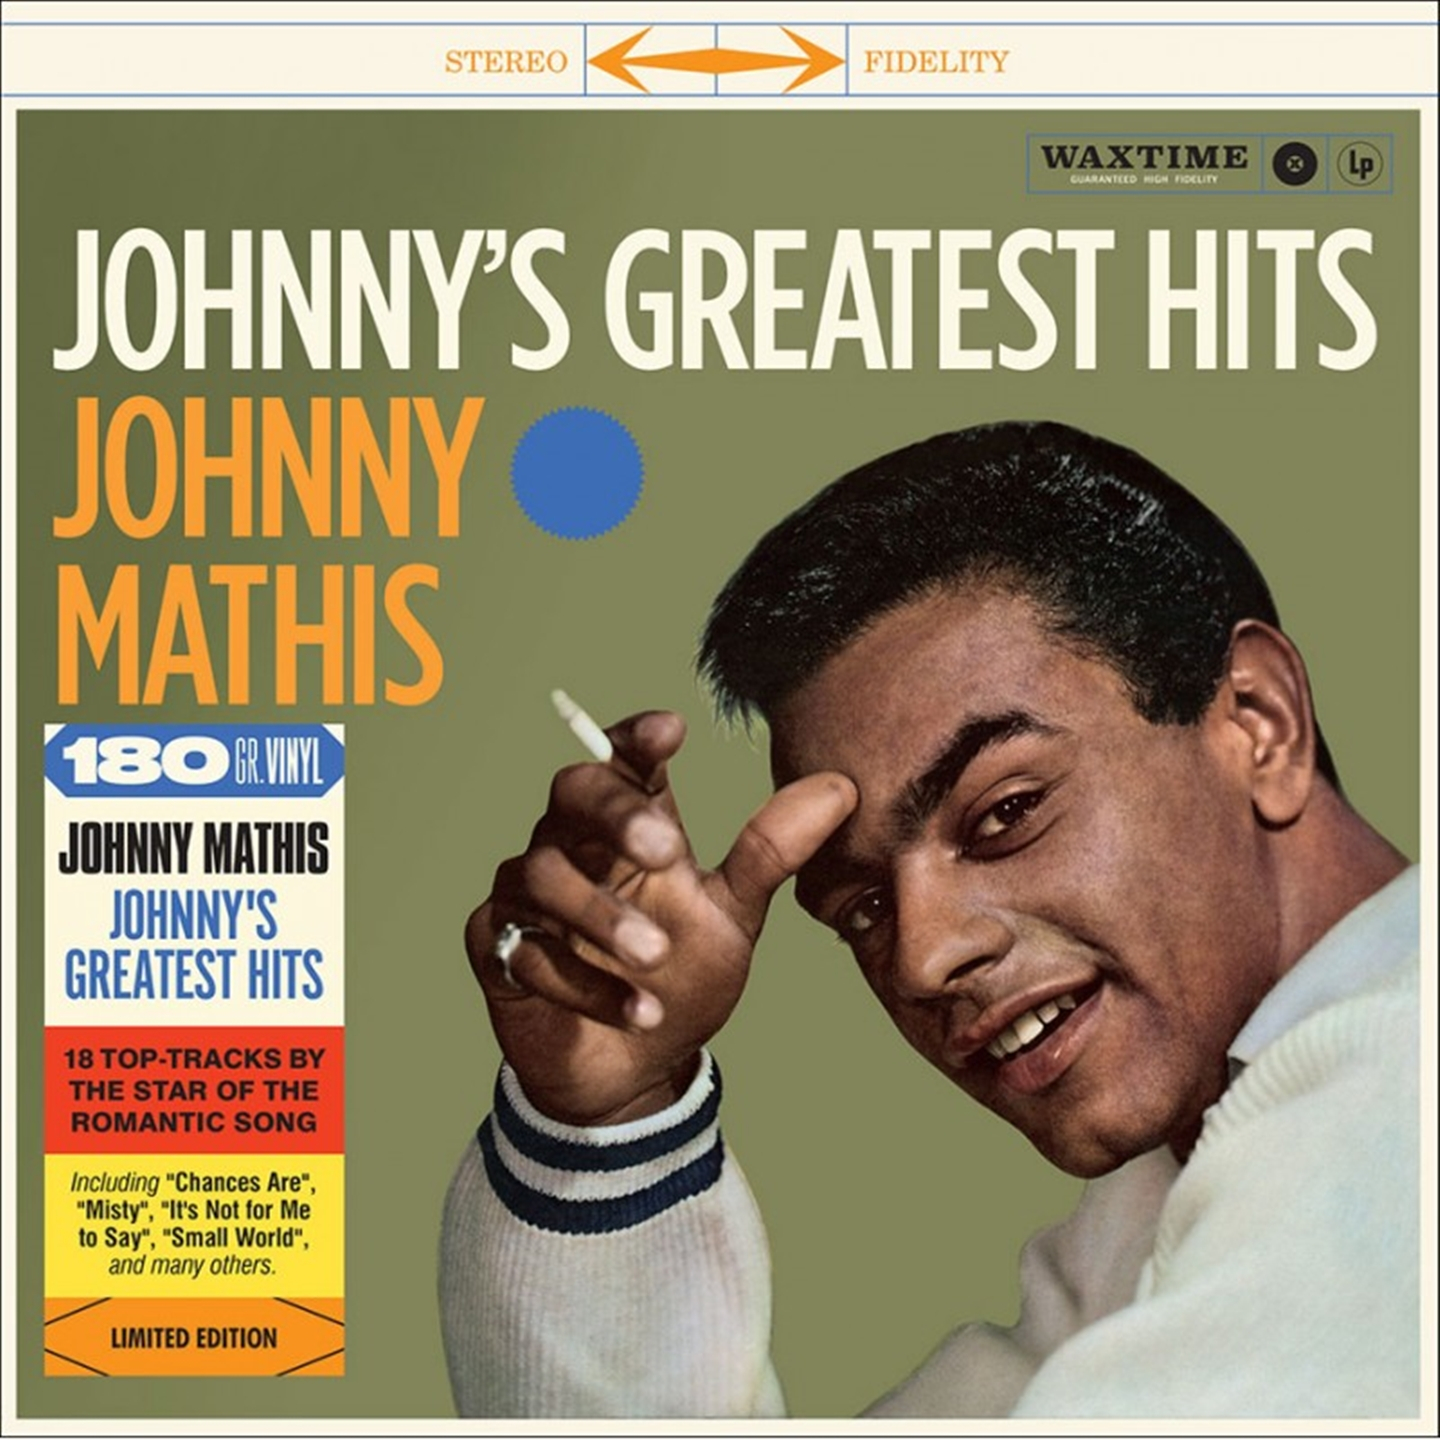 JOHNNY'S GREATEST HITS - 18 TOP-TRACKS BY THE STAR OF THE ROMANTIC SONG [LP]